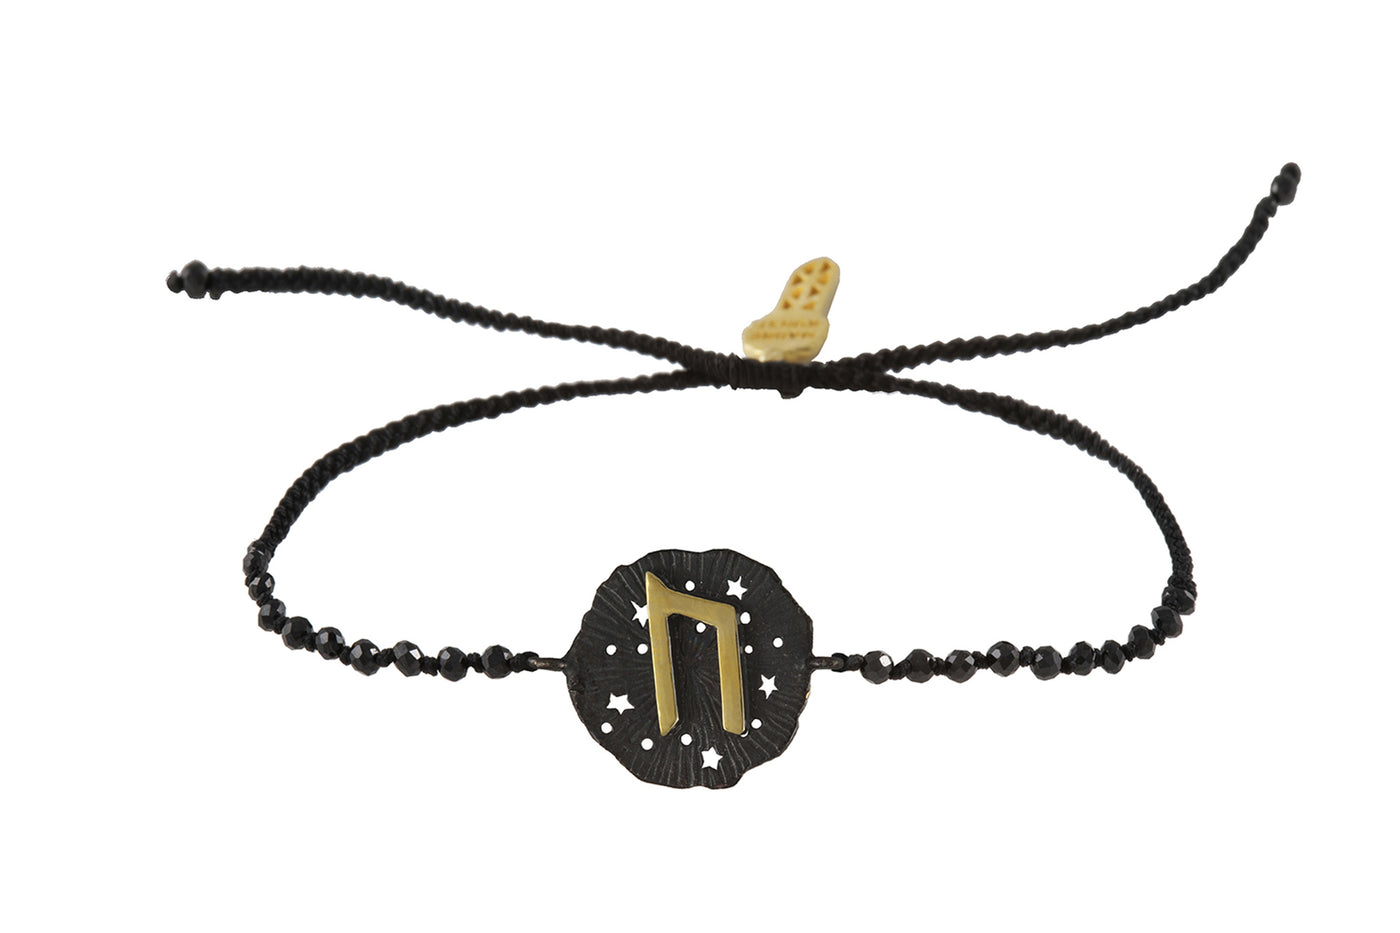 Runic medallion amulet Uruz bracelet with beads. Gold plated and oxide